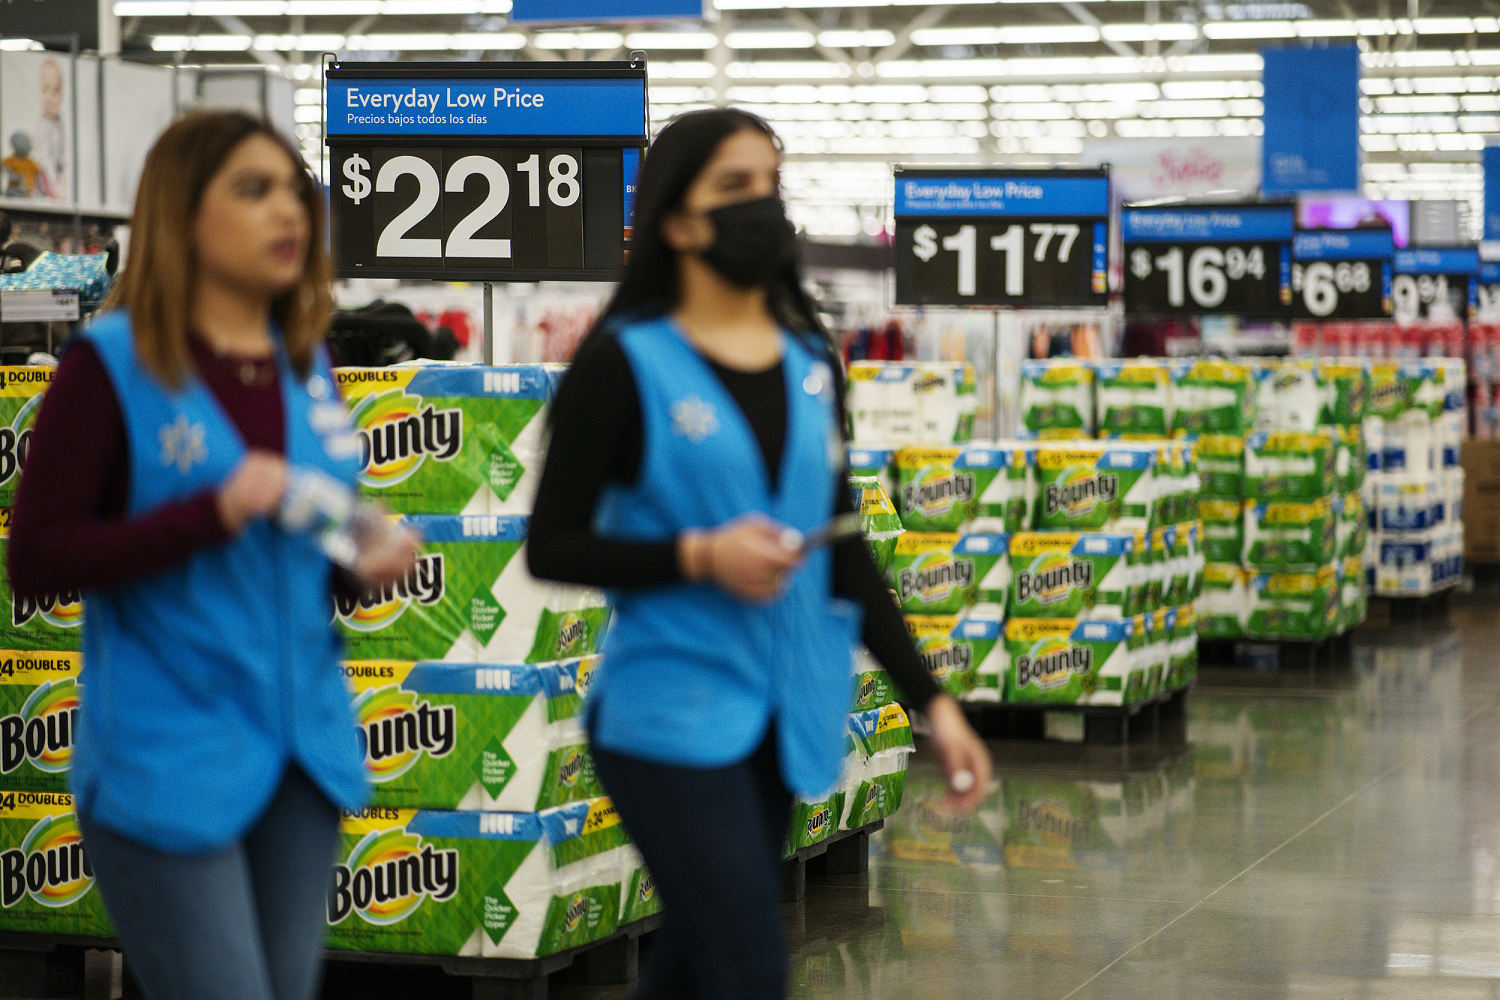 Walmart, Chipotle and others feel the heat over prices